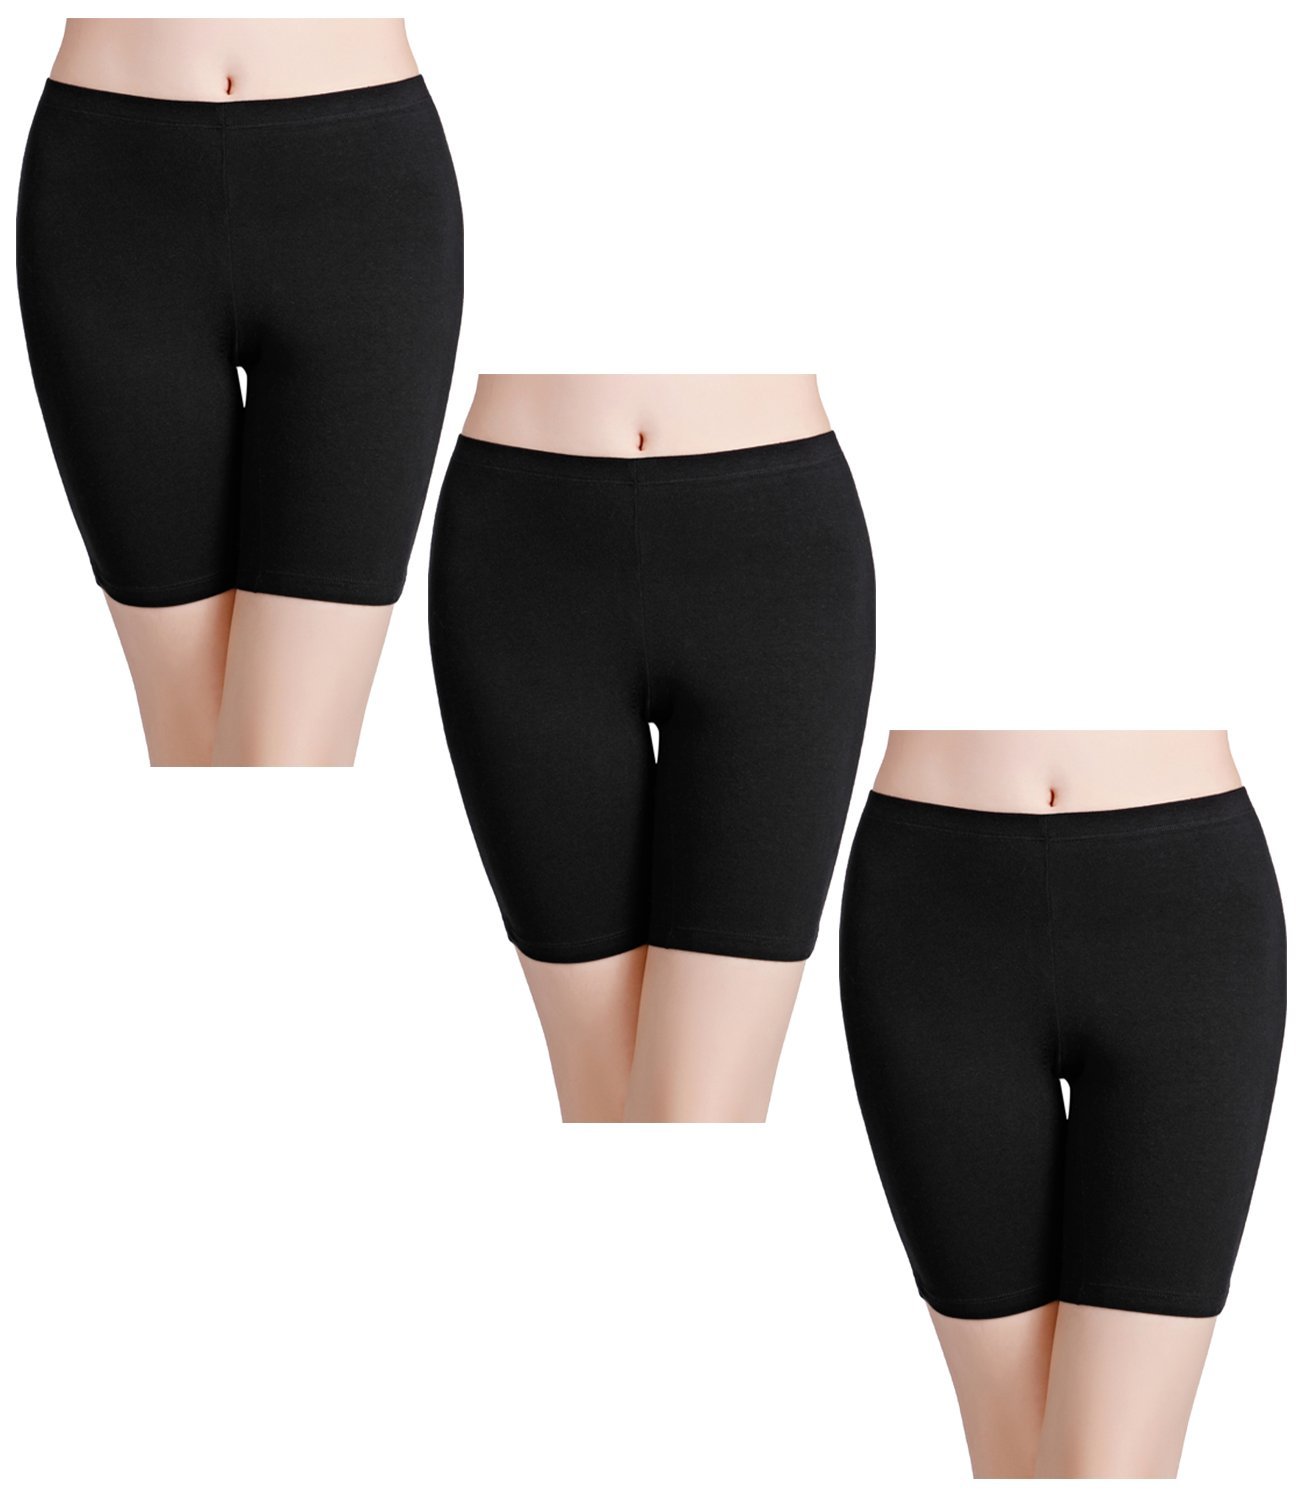 YADIFEN 3 PACK Womens Safety Shorts Anti Chafing Long Briefs